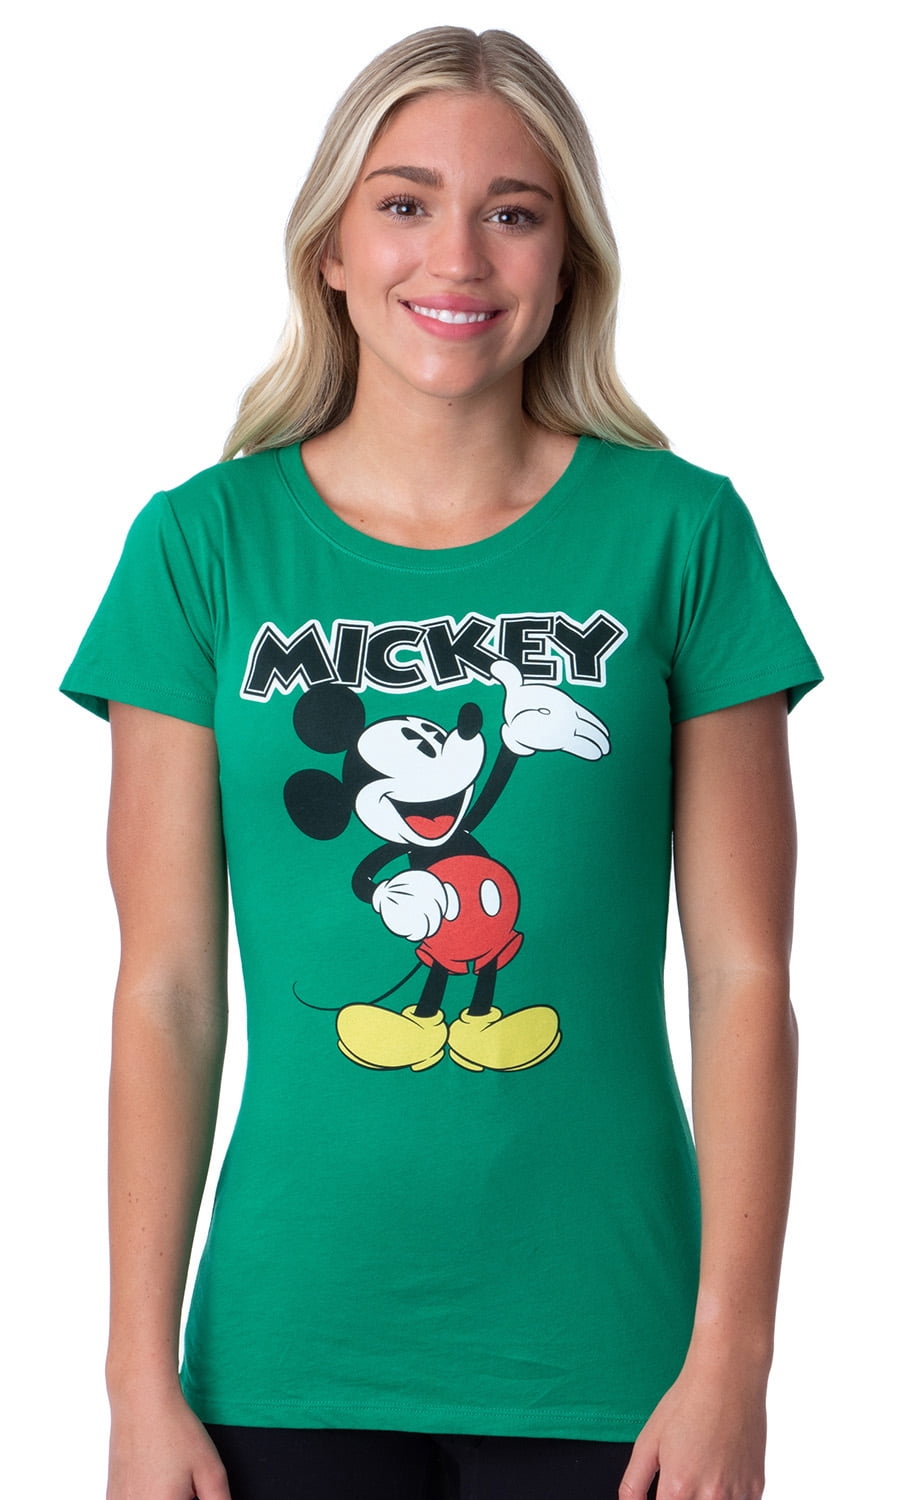 Disney Womens' Classic Comfy Mickey Mouse Character Crewneck Shirt Top ...